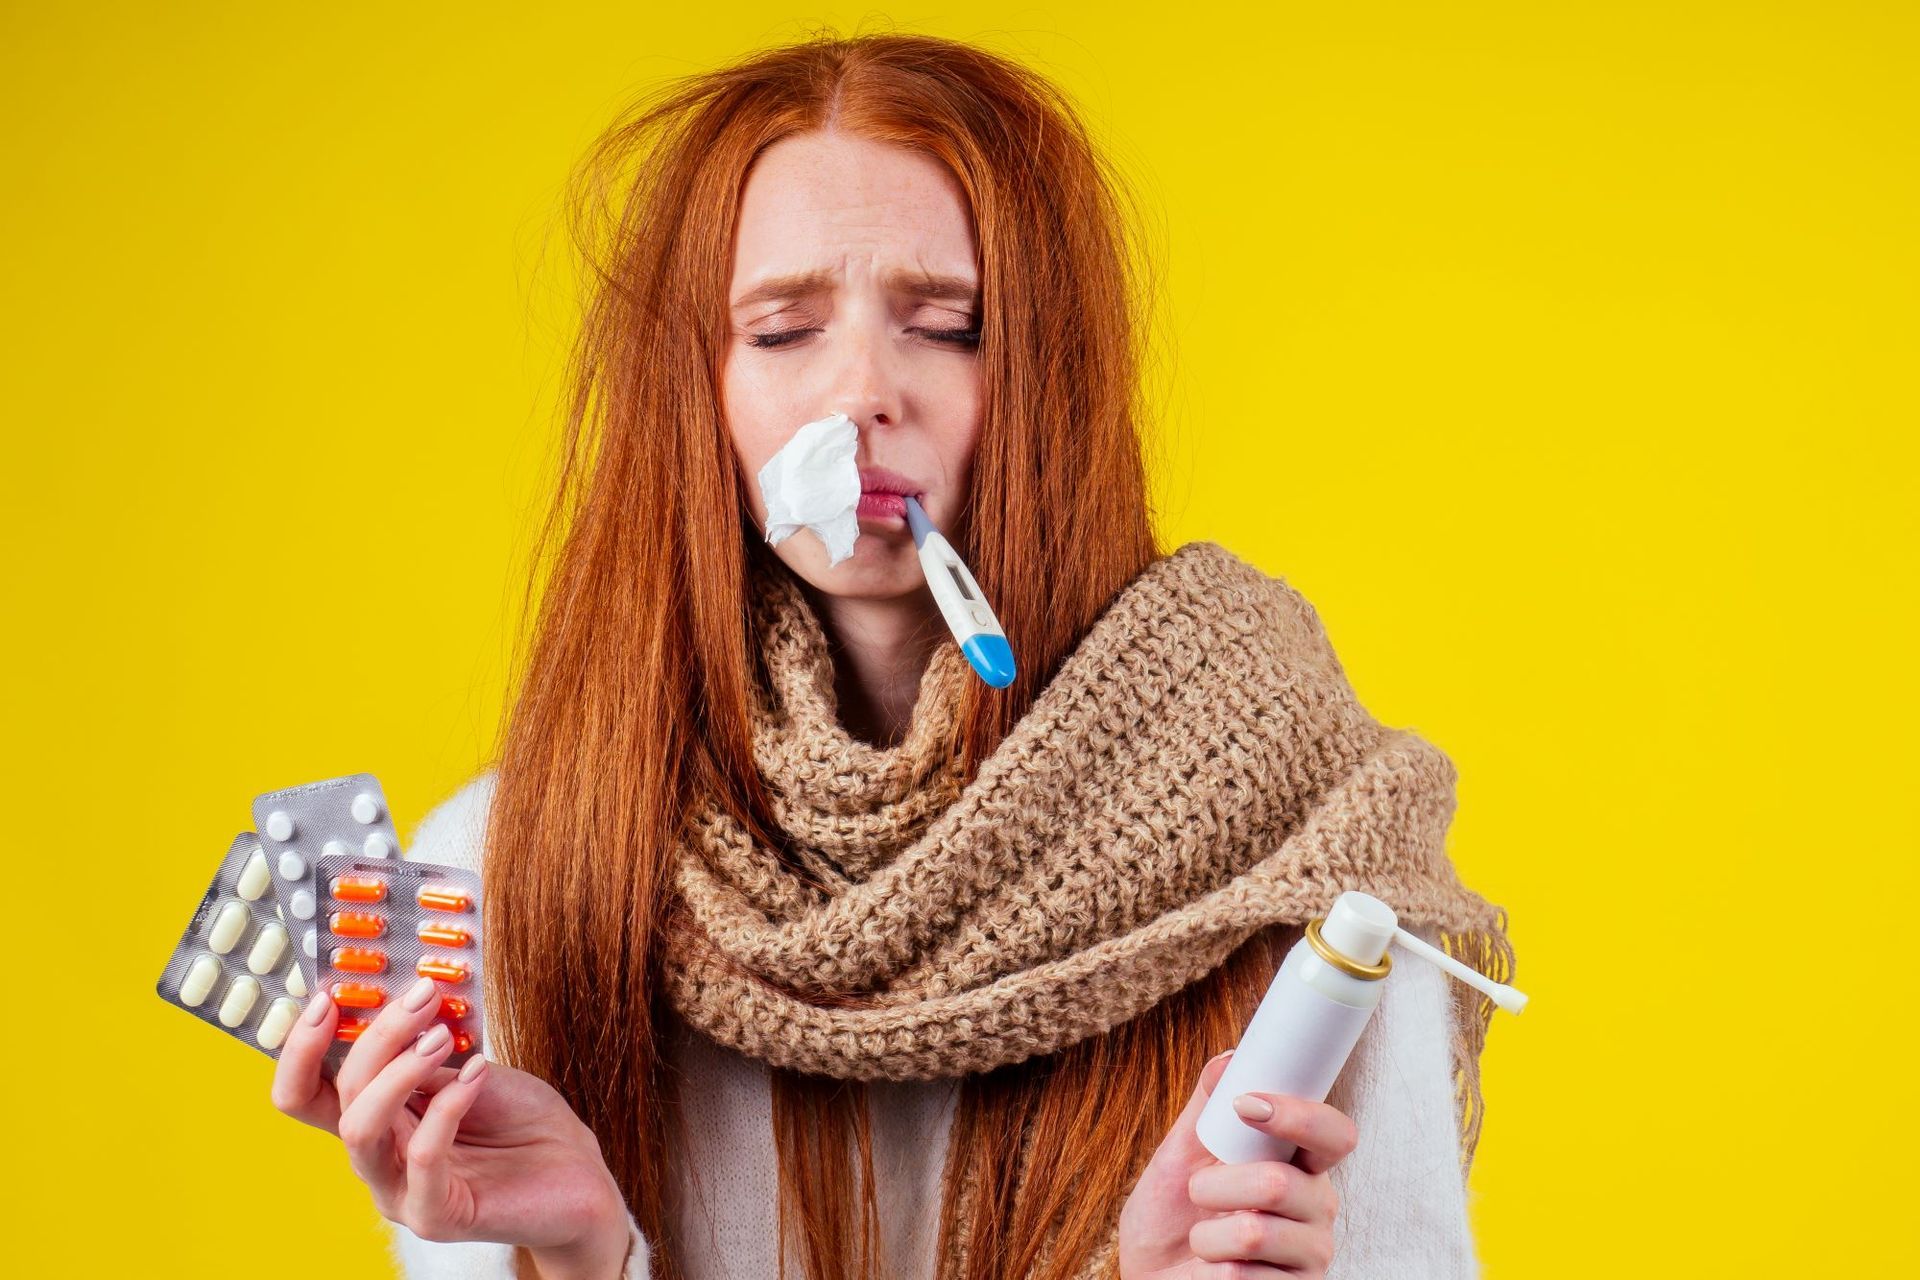 A woman with red hair is blowing her nose while holding a thermometer and pills.